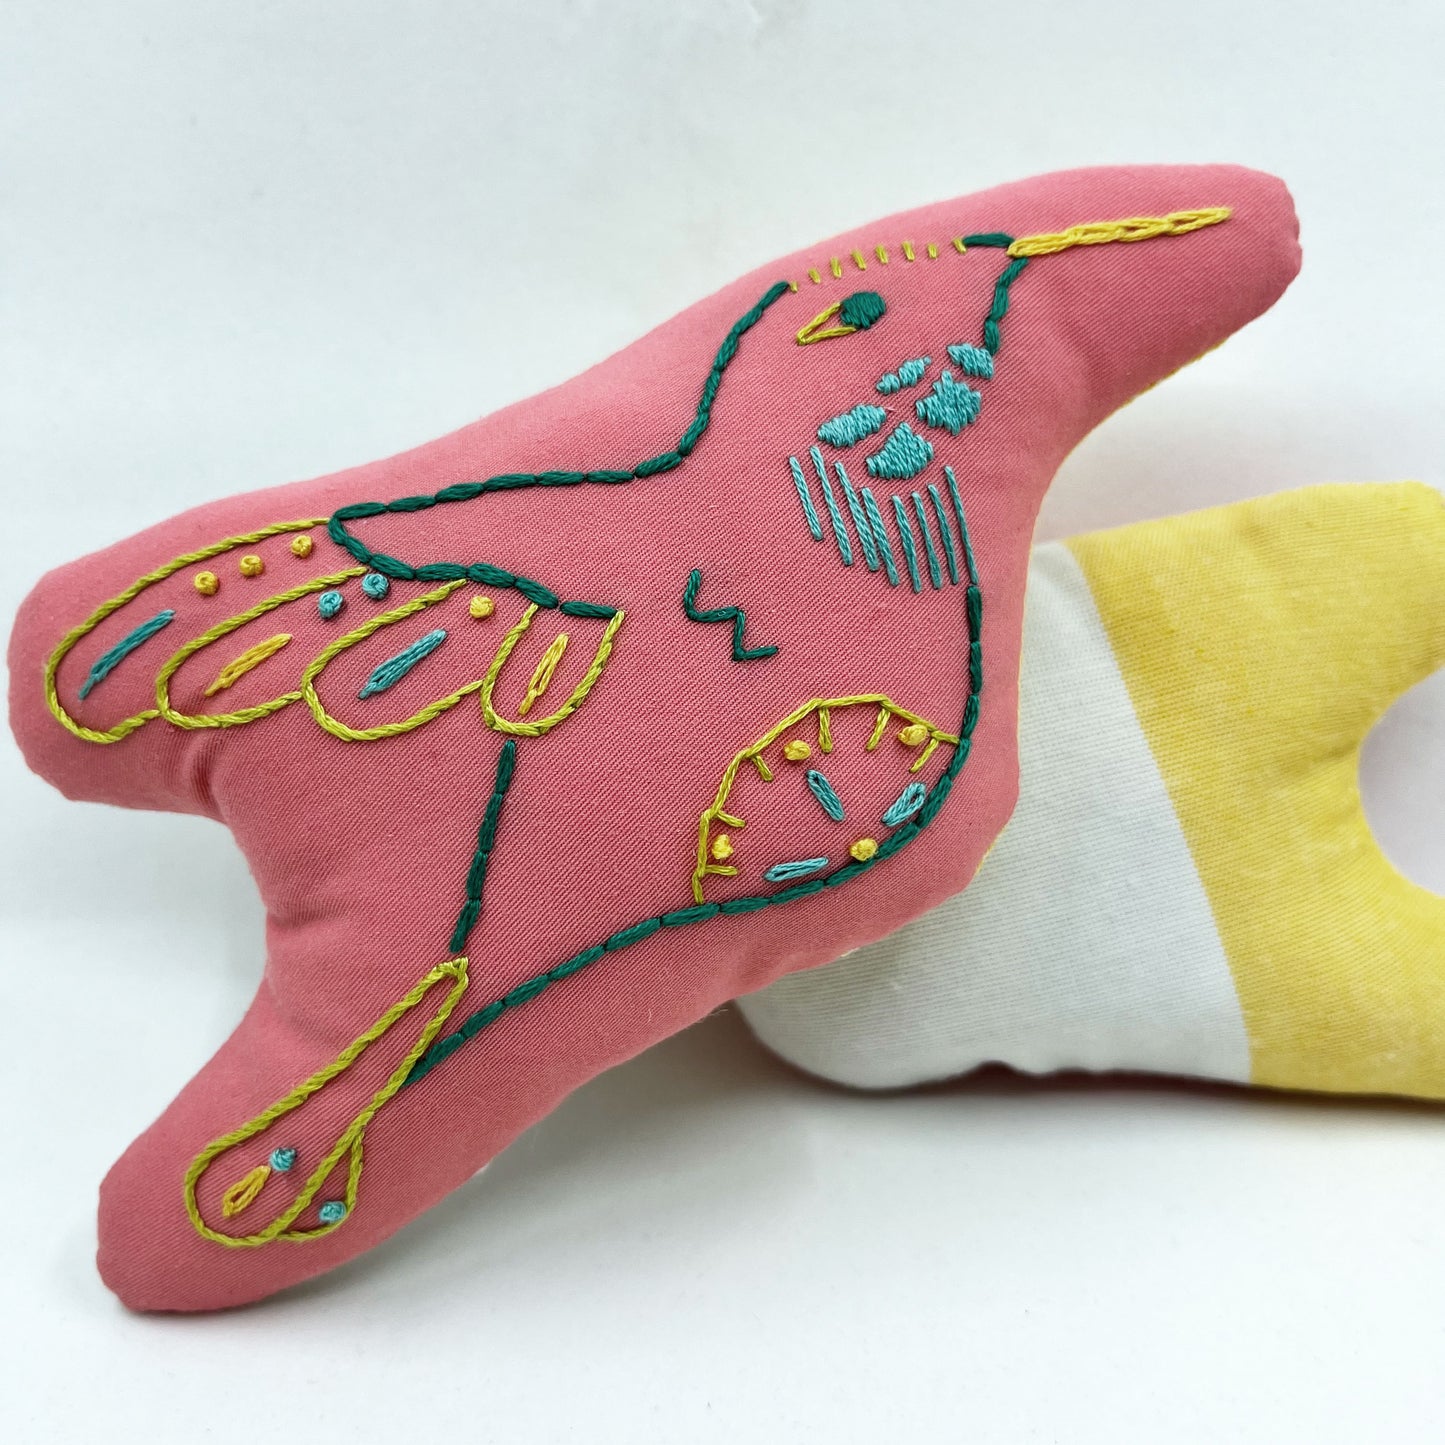  colorfully hand embroidered stuffed pillow animal of a hummingbird on coral fabric, behind it one turned around showing the back side made of shite and yellow color blocked fabric